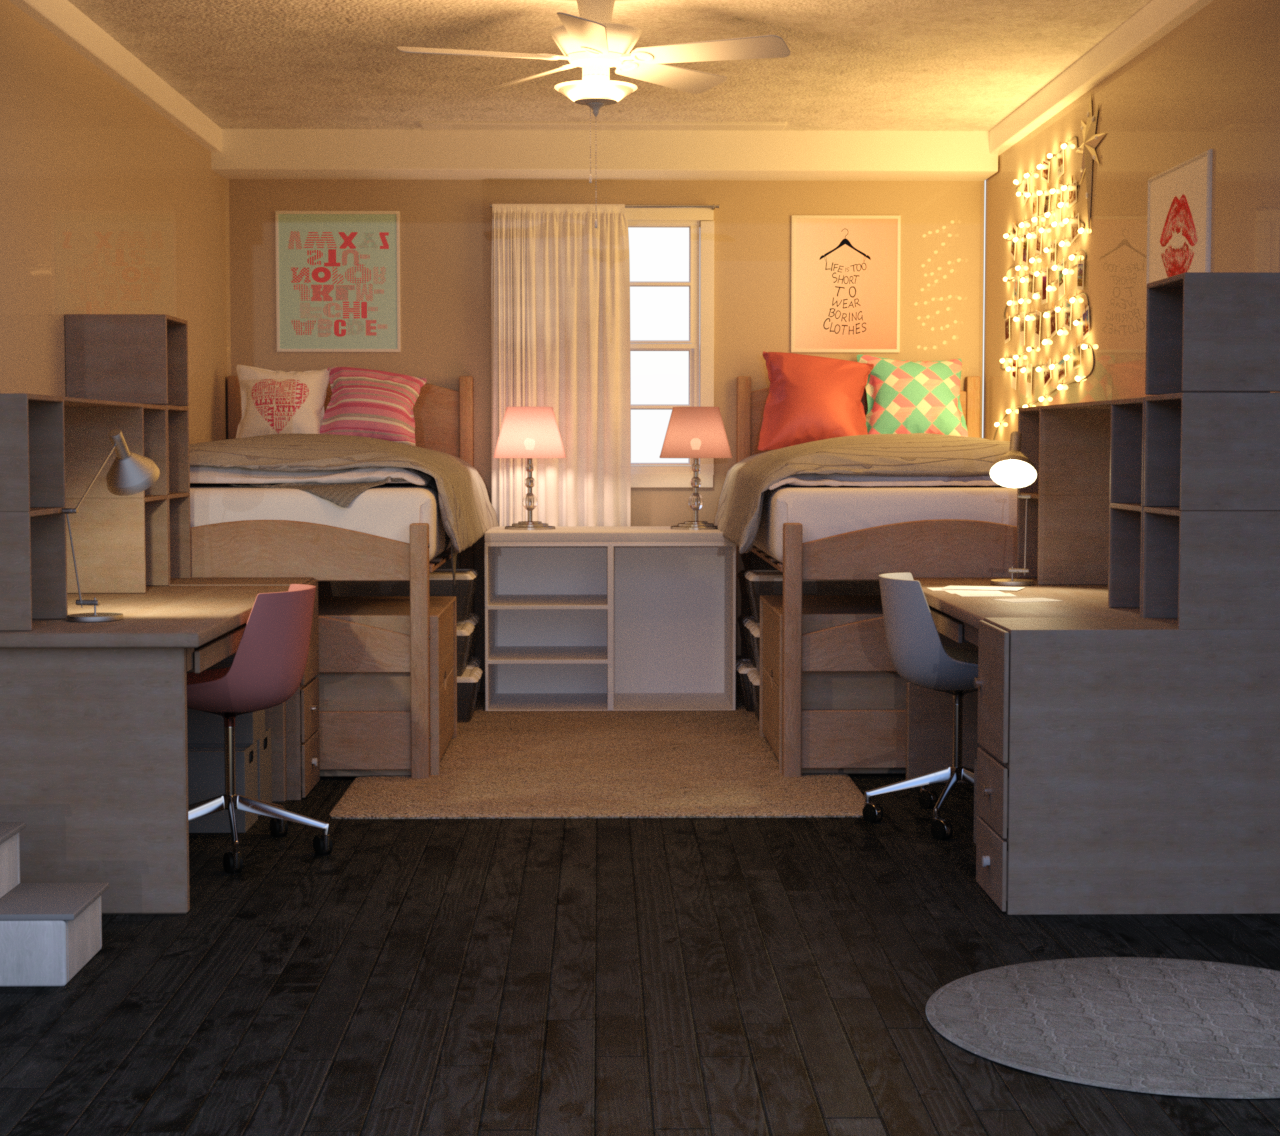 INT. DOUBLE GIRLS DORM ROOM 1 – DAY